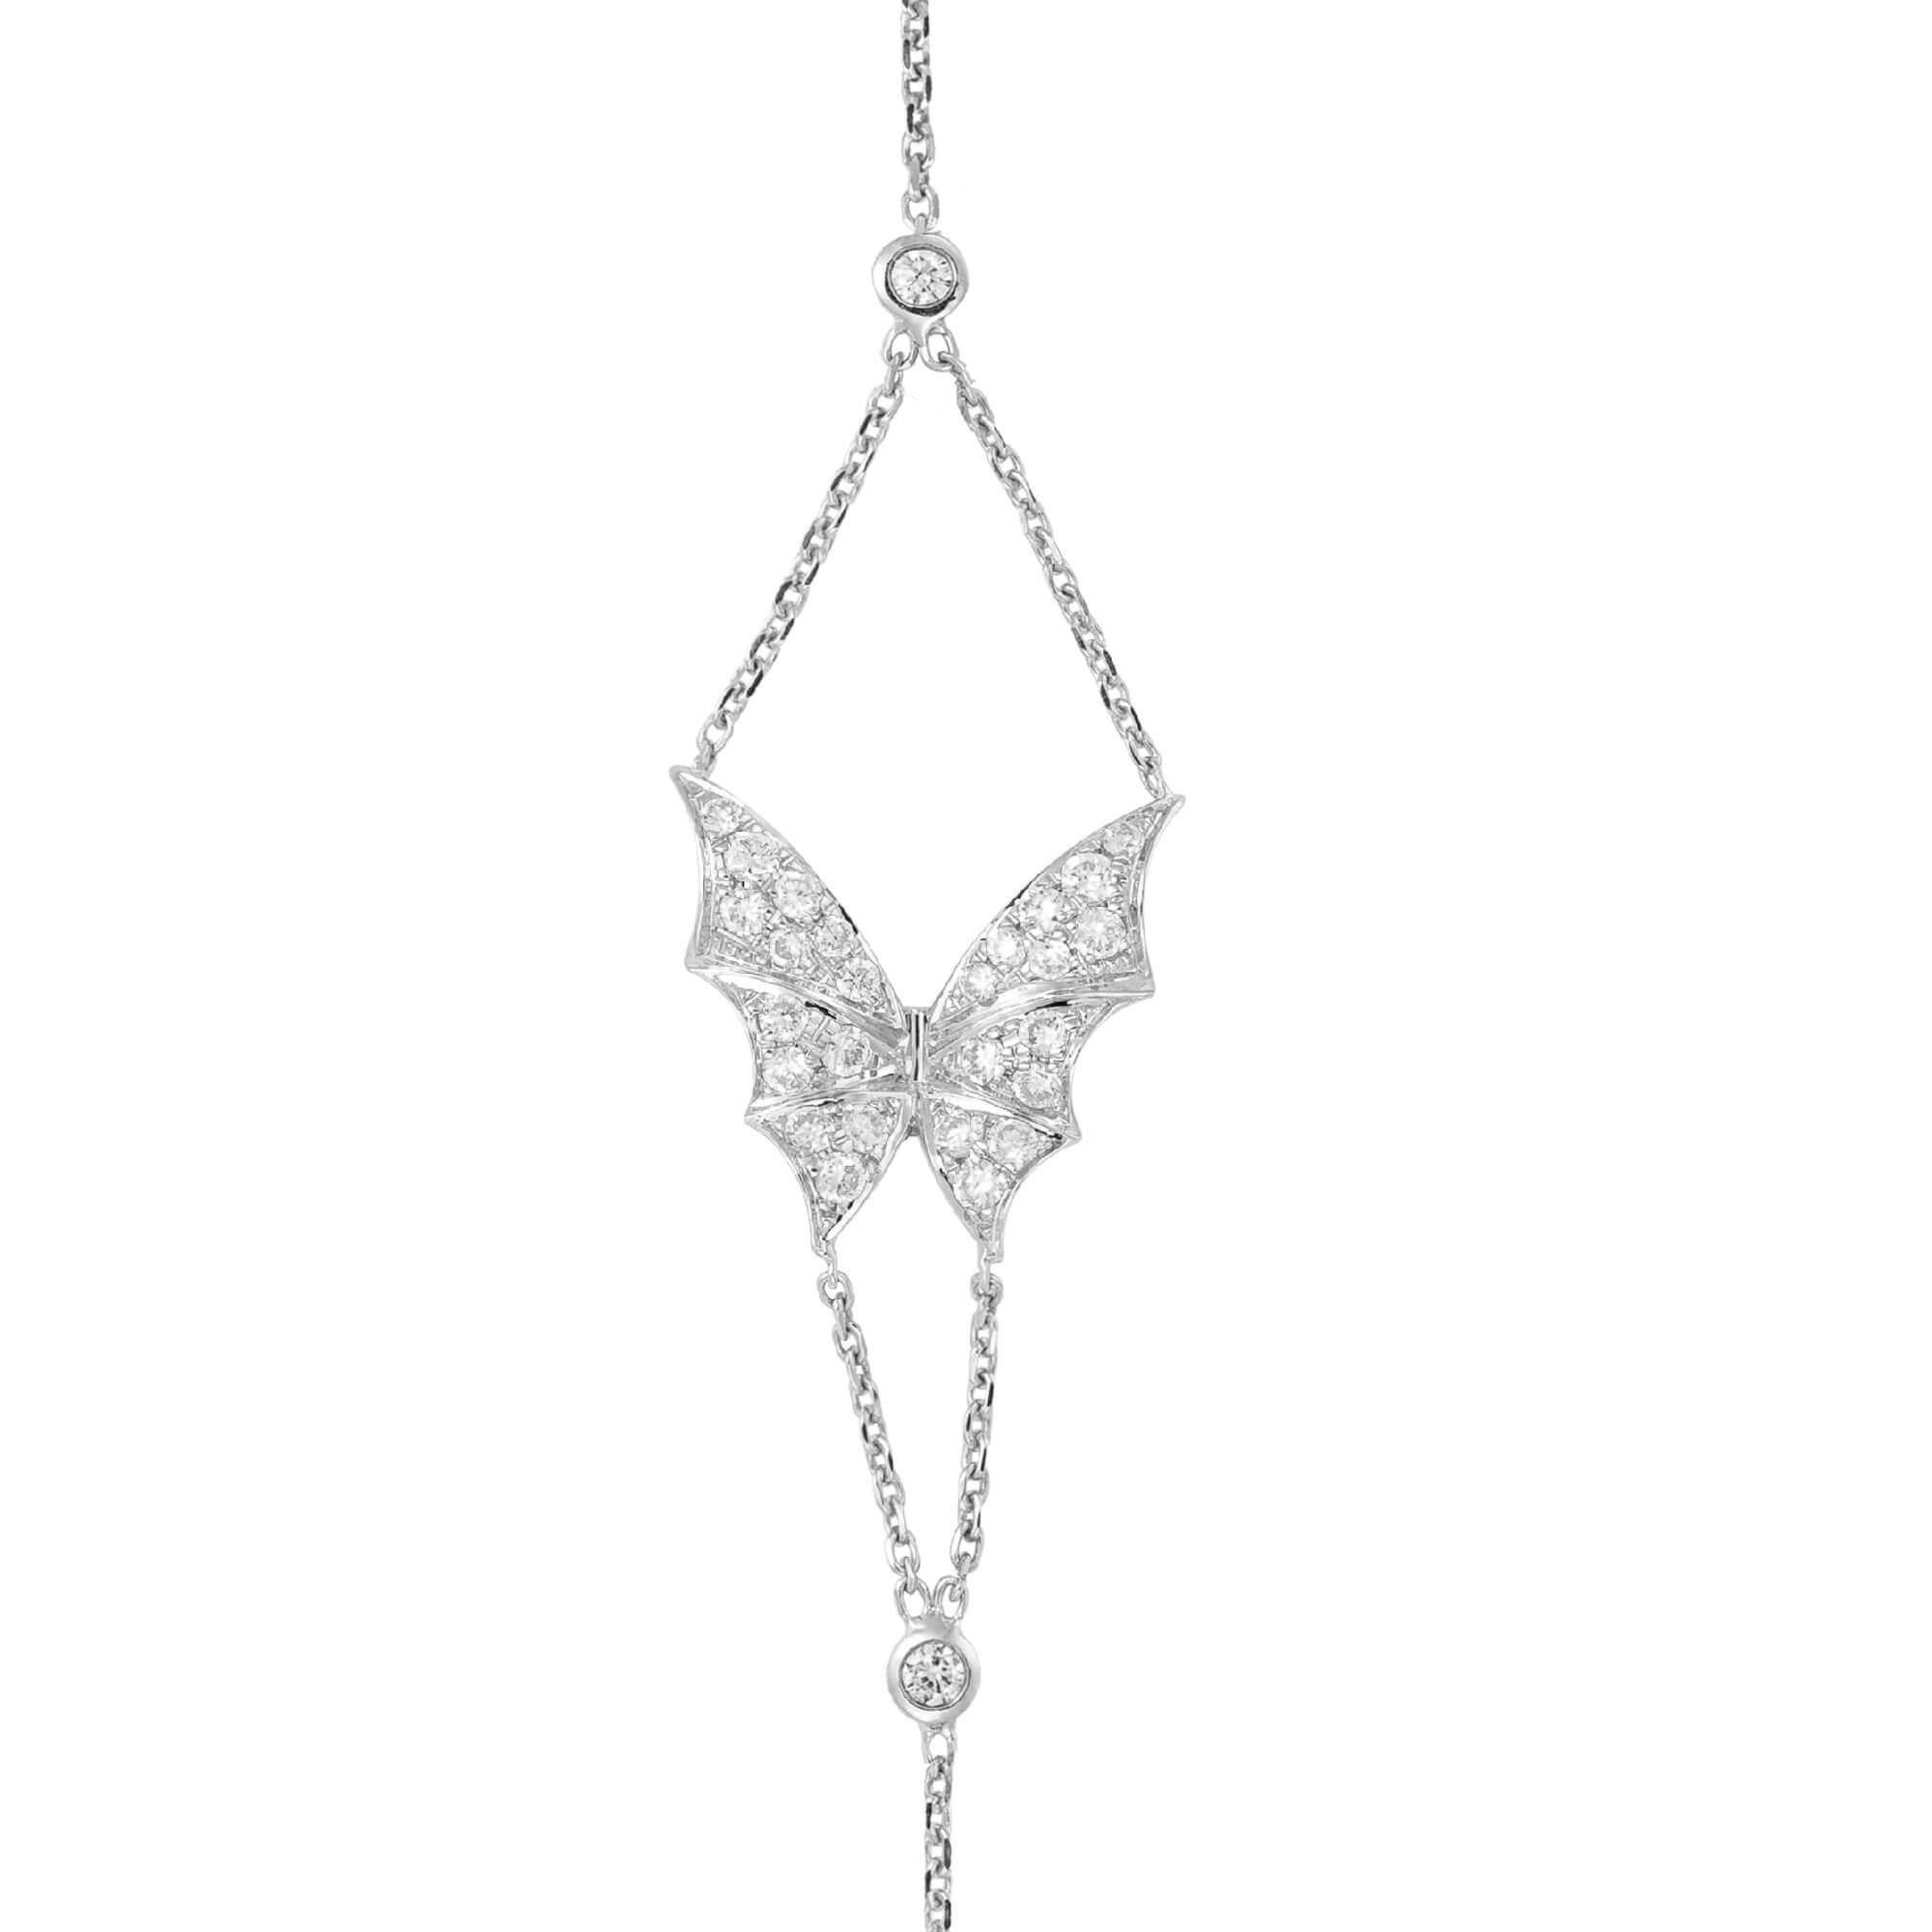 Masterfully handcrafted in 18ct white gold and 0.23 carat white diamond pavé, this 'Fly By Night' Pavé Bracelet is inspired by the nocturnal winged creatures that dwell in the mysterious depths of forests. Effortlessly style for day or evening wear,